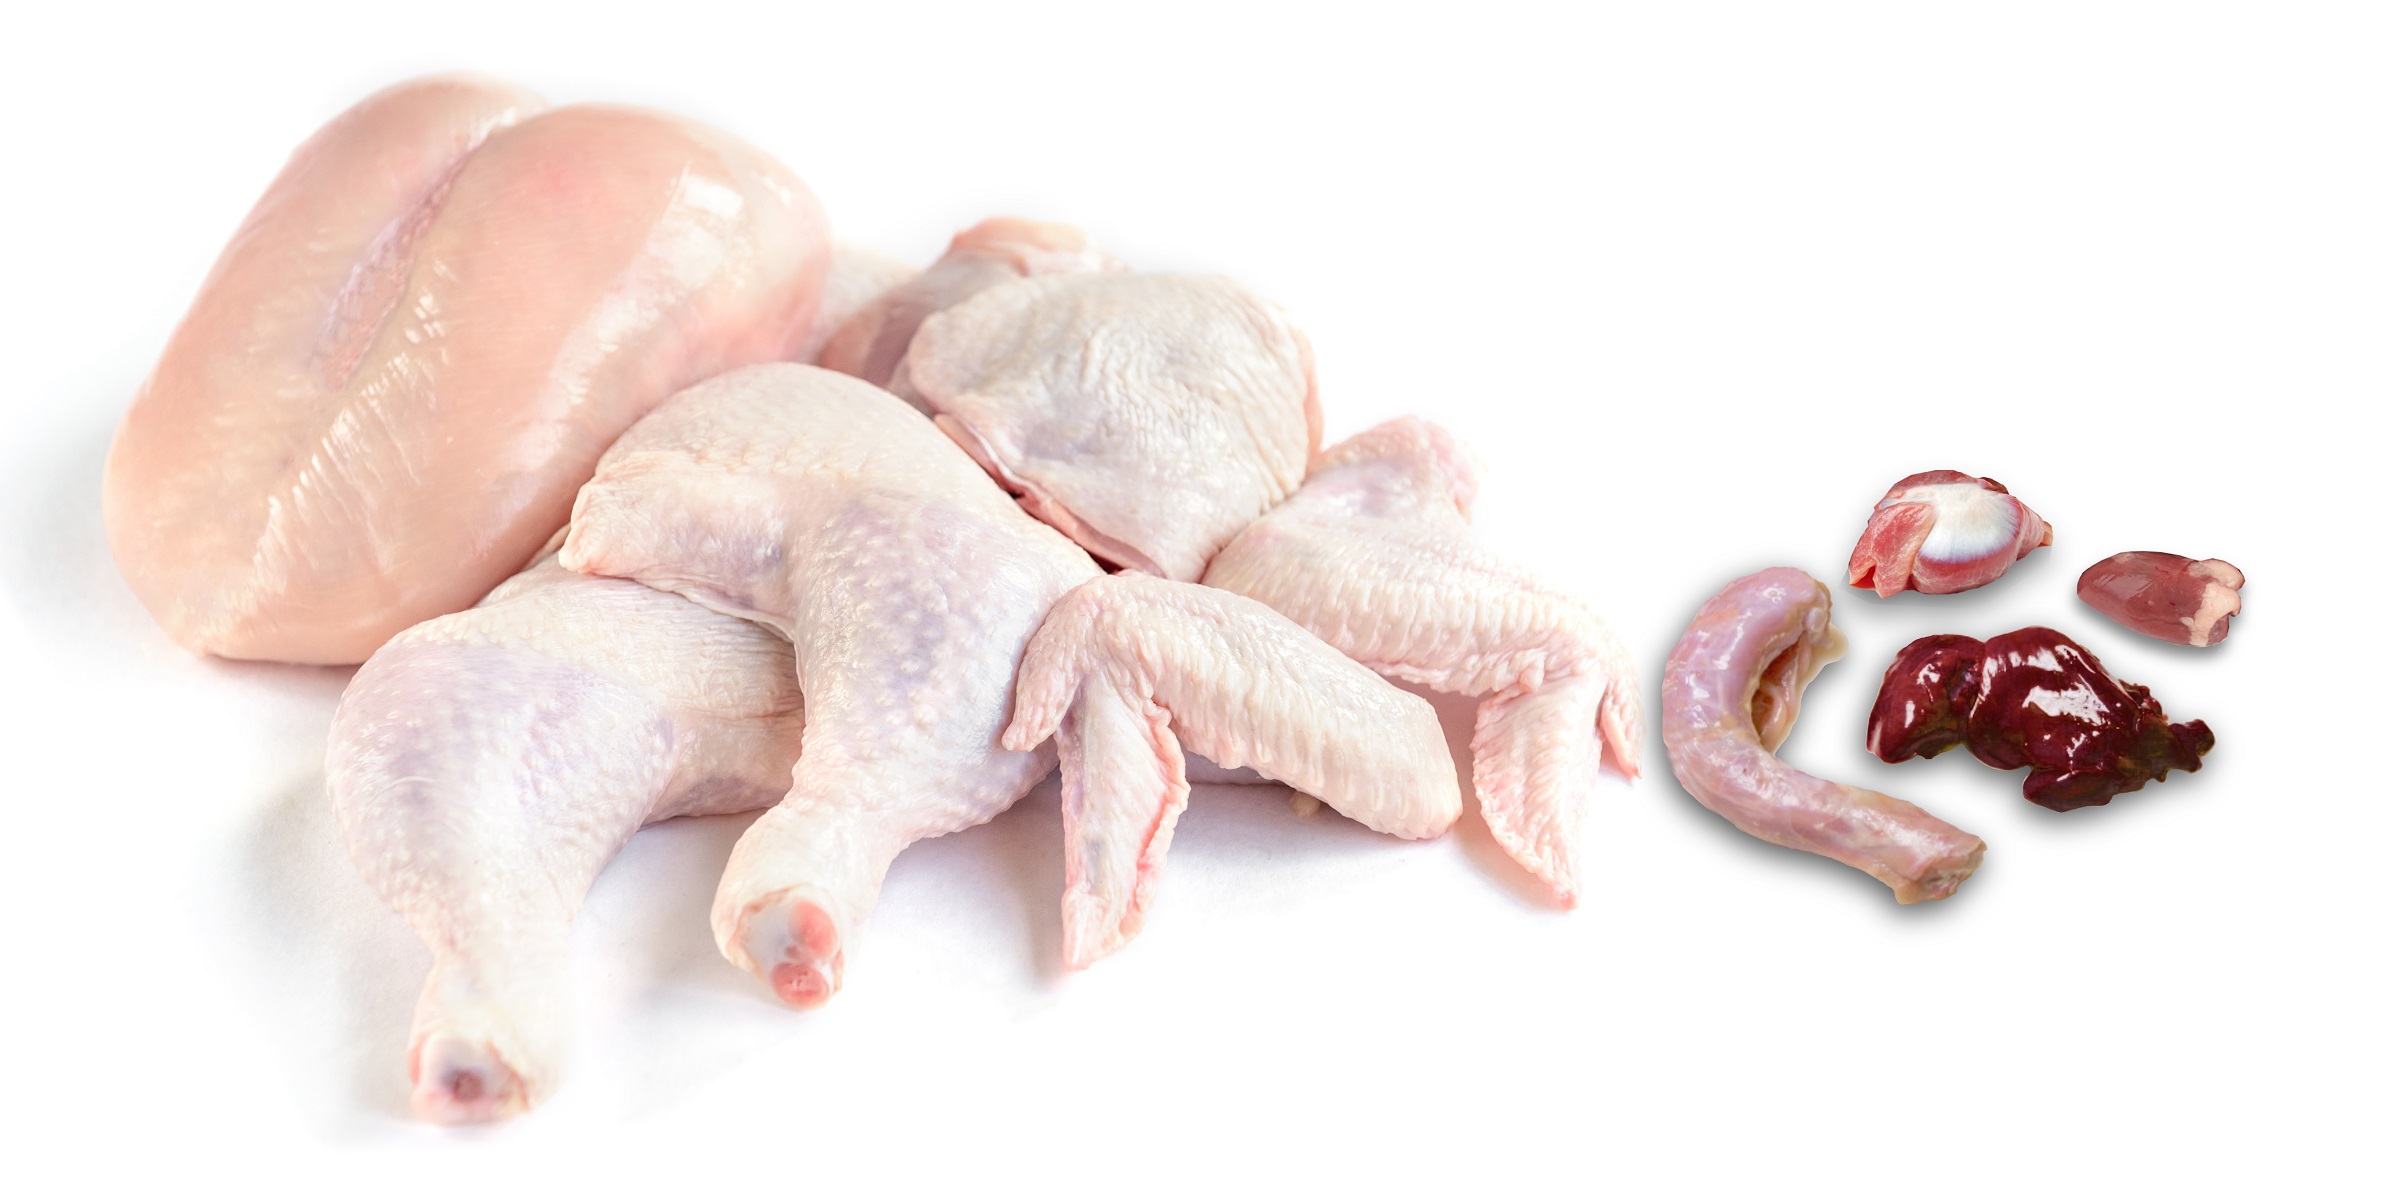 Maximum utilization – a key challenge for the poultry industry